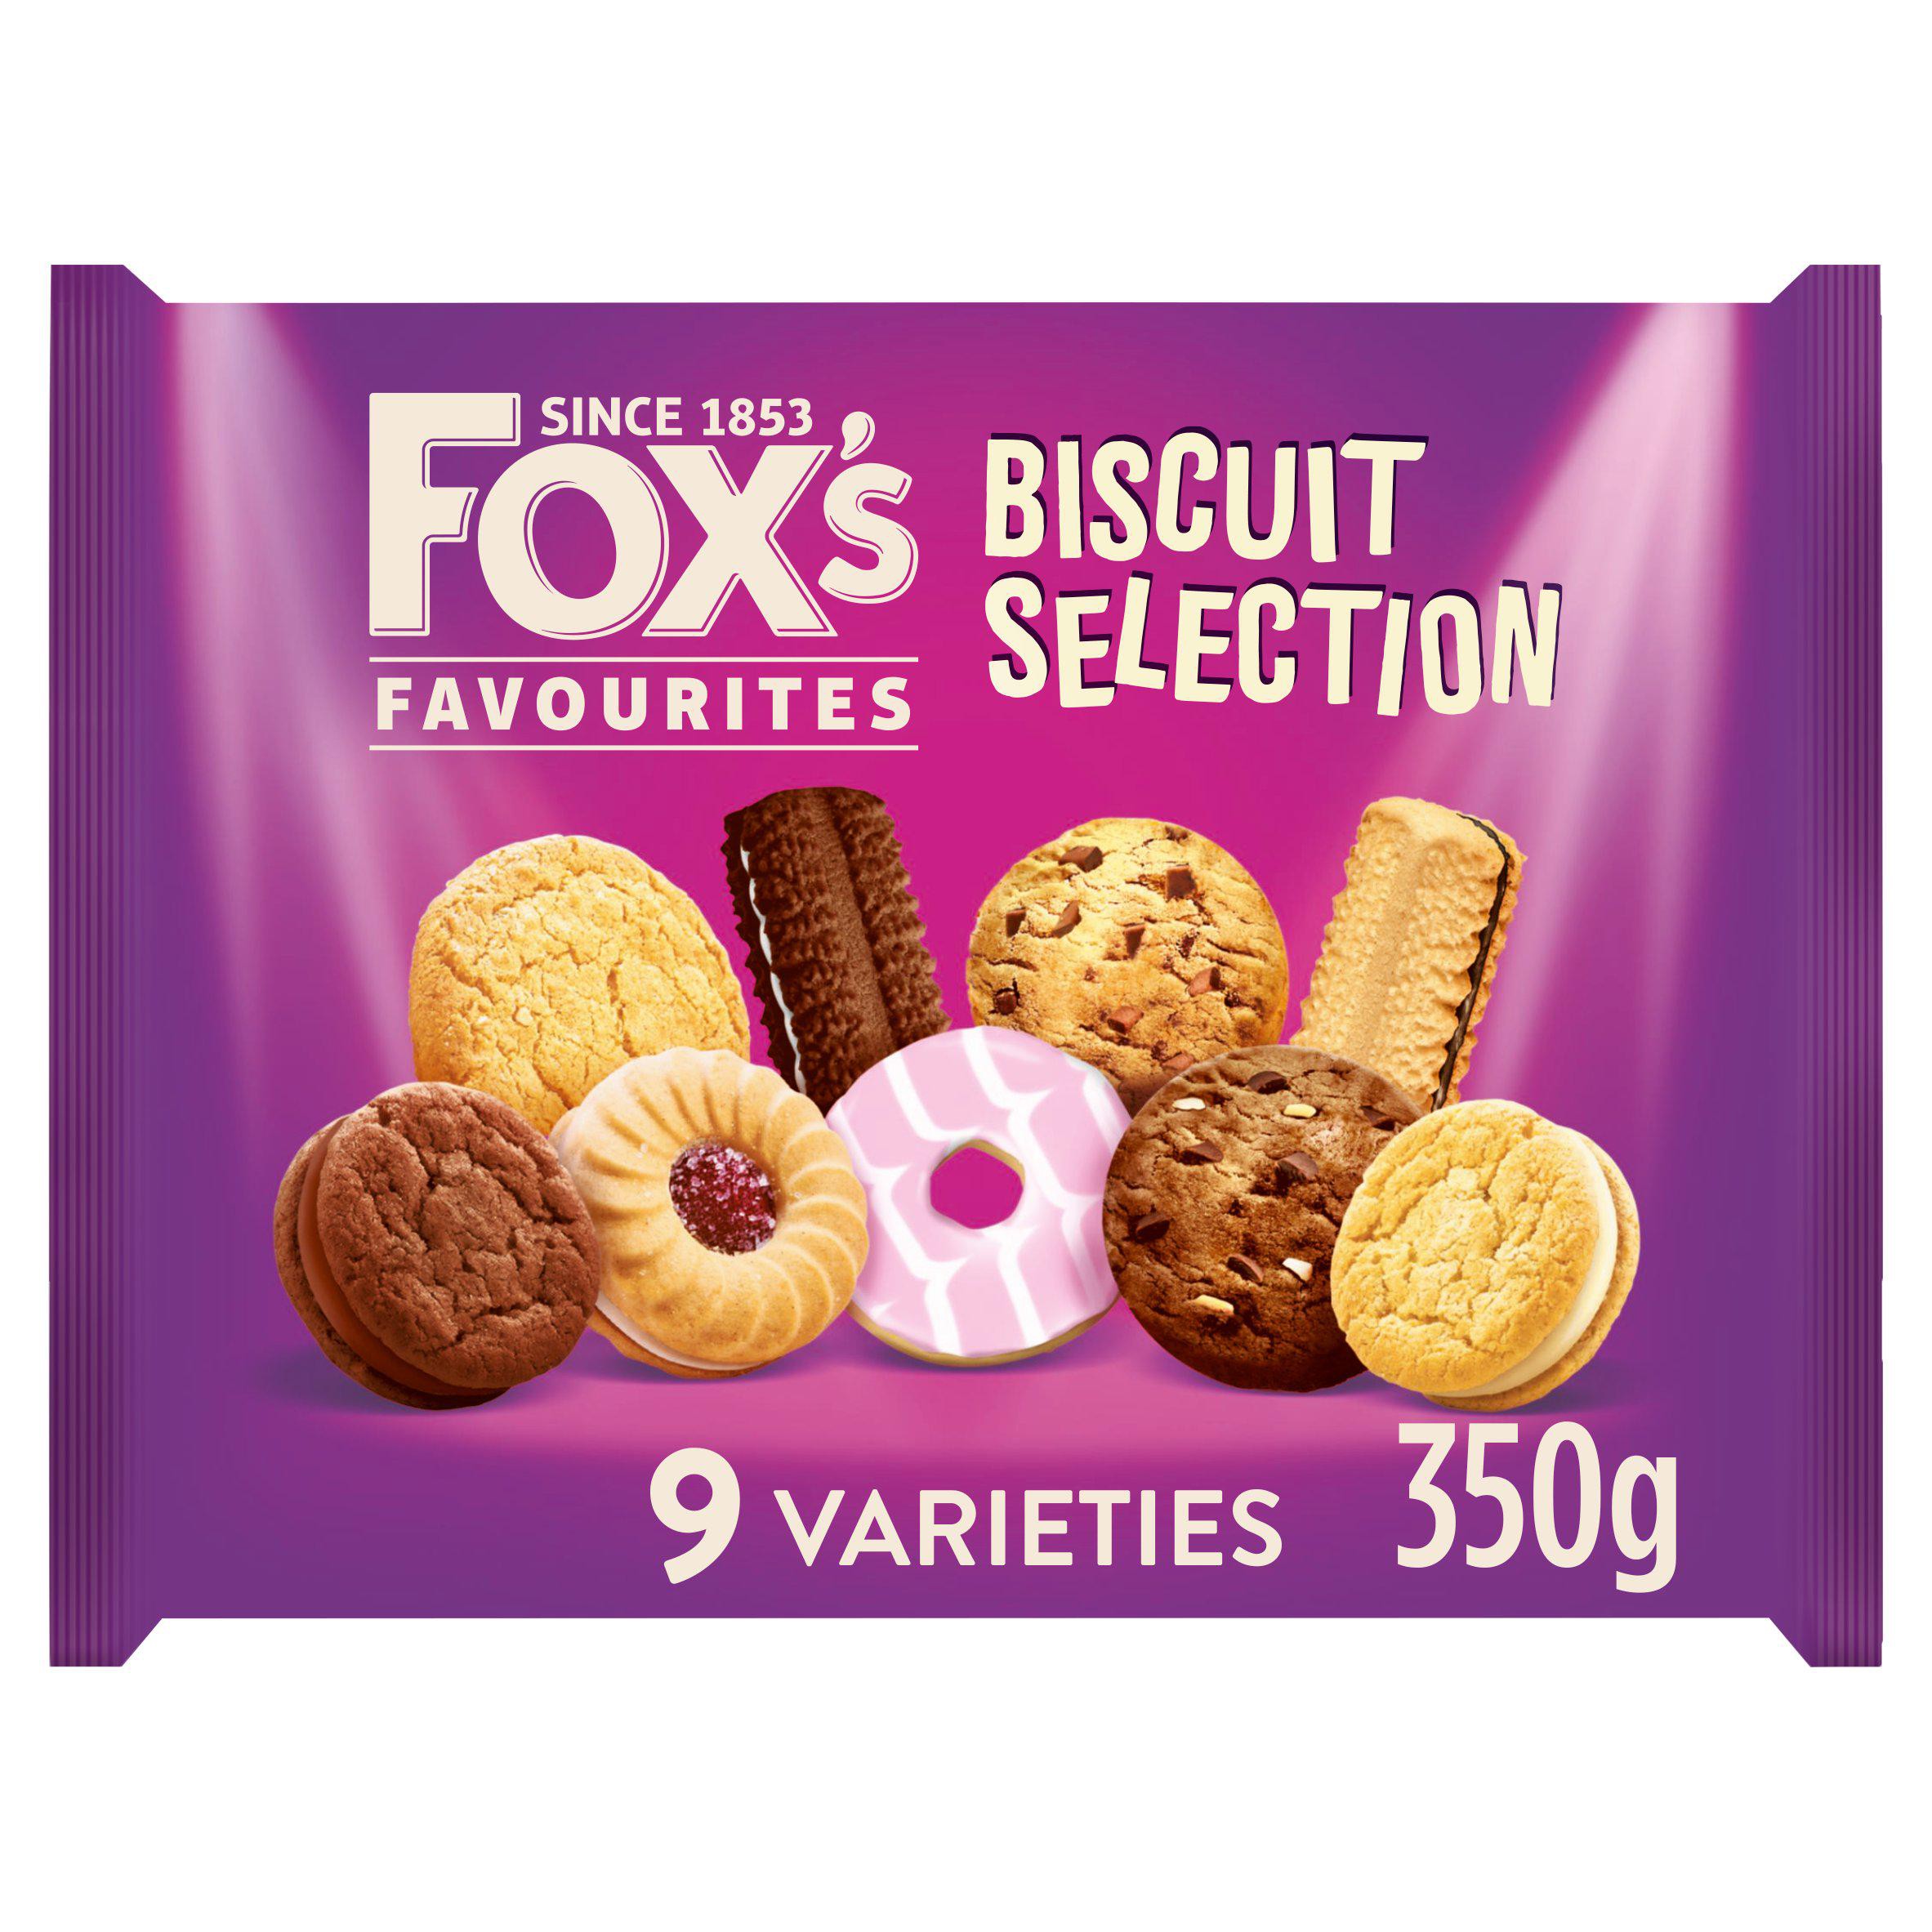 Free+biscuit+on+orders+over+%C2%A380.00+just+add+this+code+only+1+promo+per+day+excludes+Royal+Mail+Stamps+and+VAT+